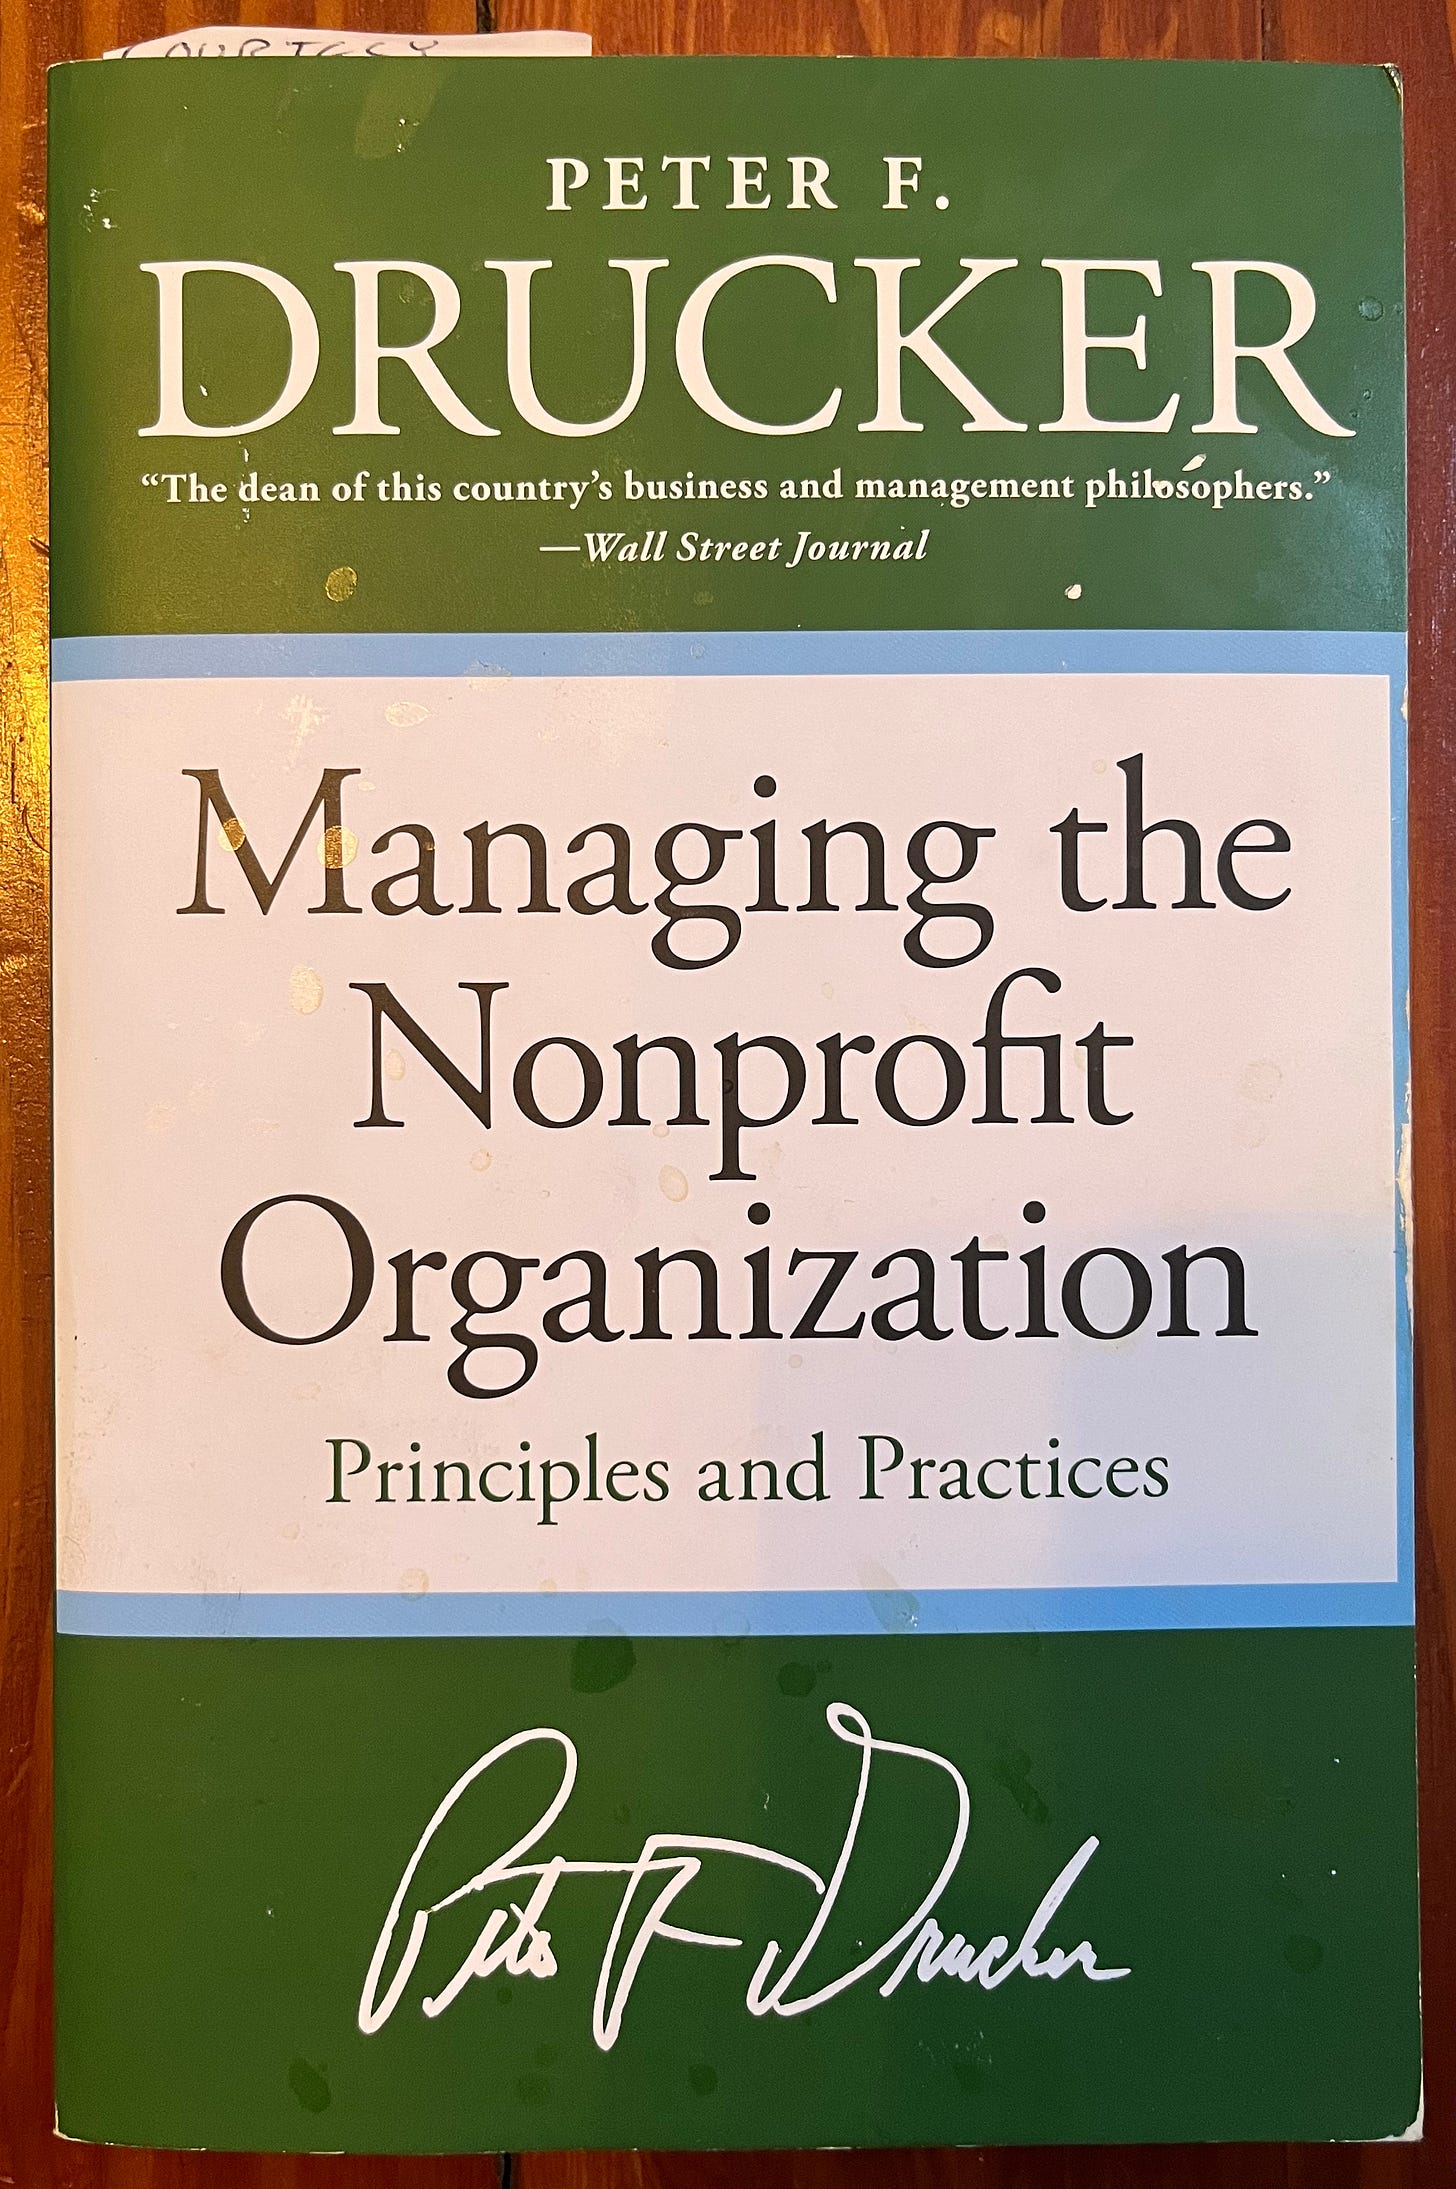 “Managing the Nonprofit Organization” by Peter F. Drucker